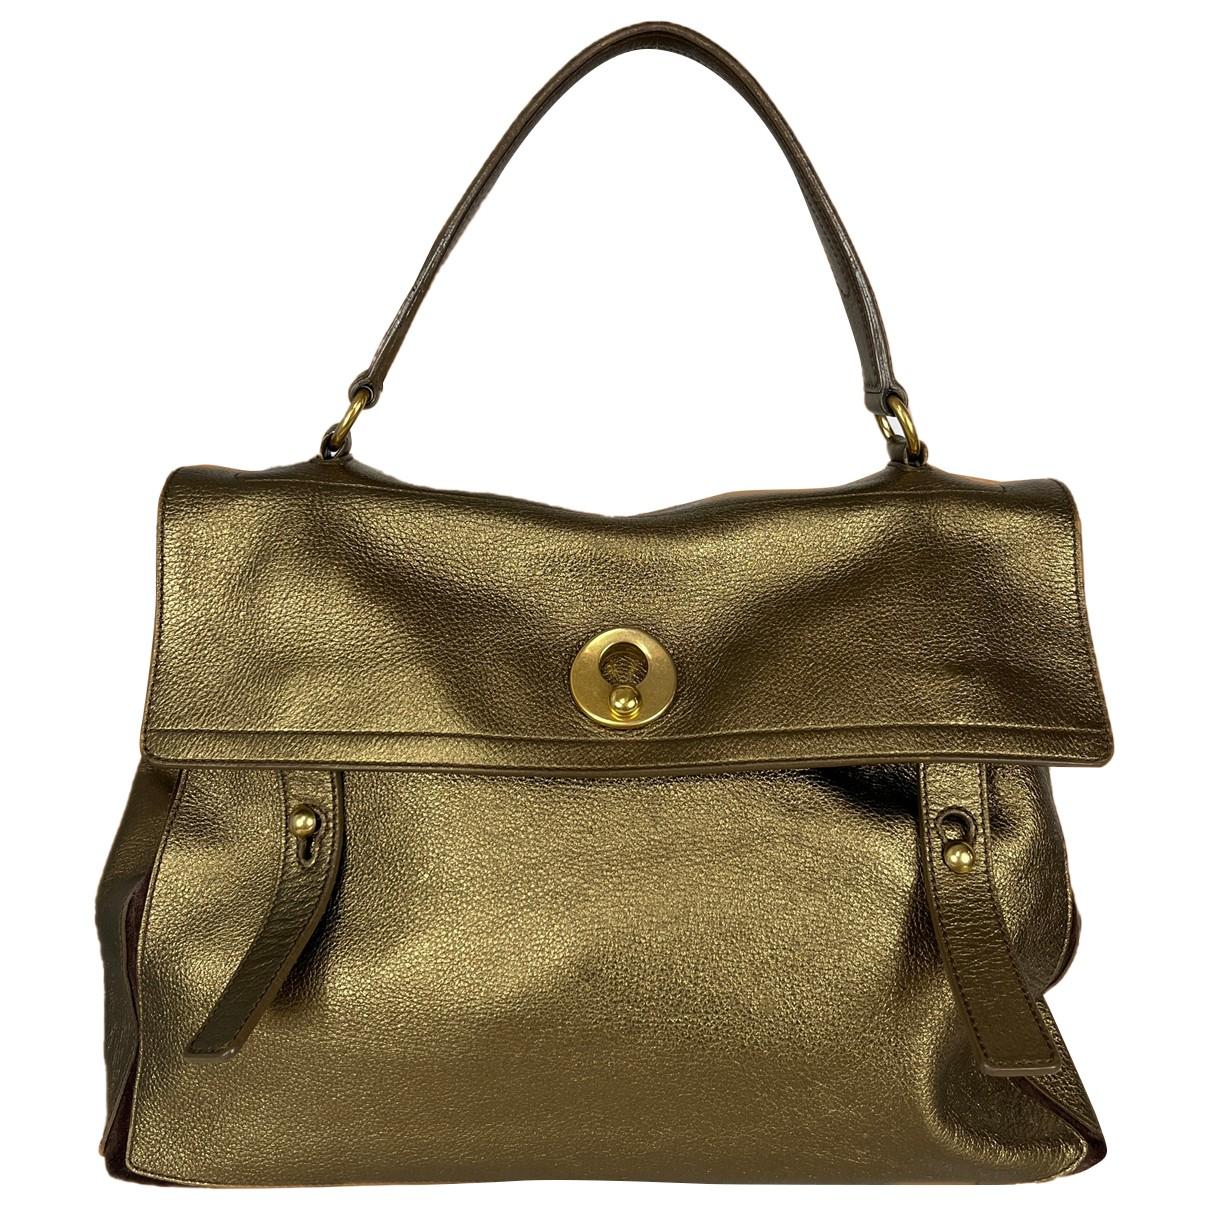 Muse two leather handbag Yves Saint Laurent Gold in Leather - 33766144